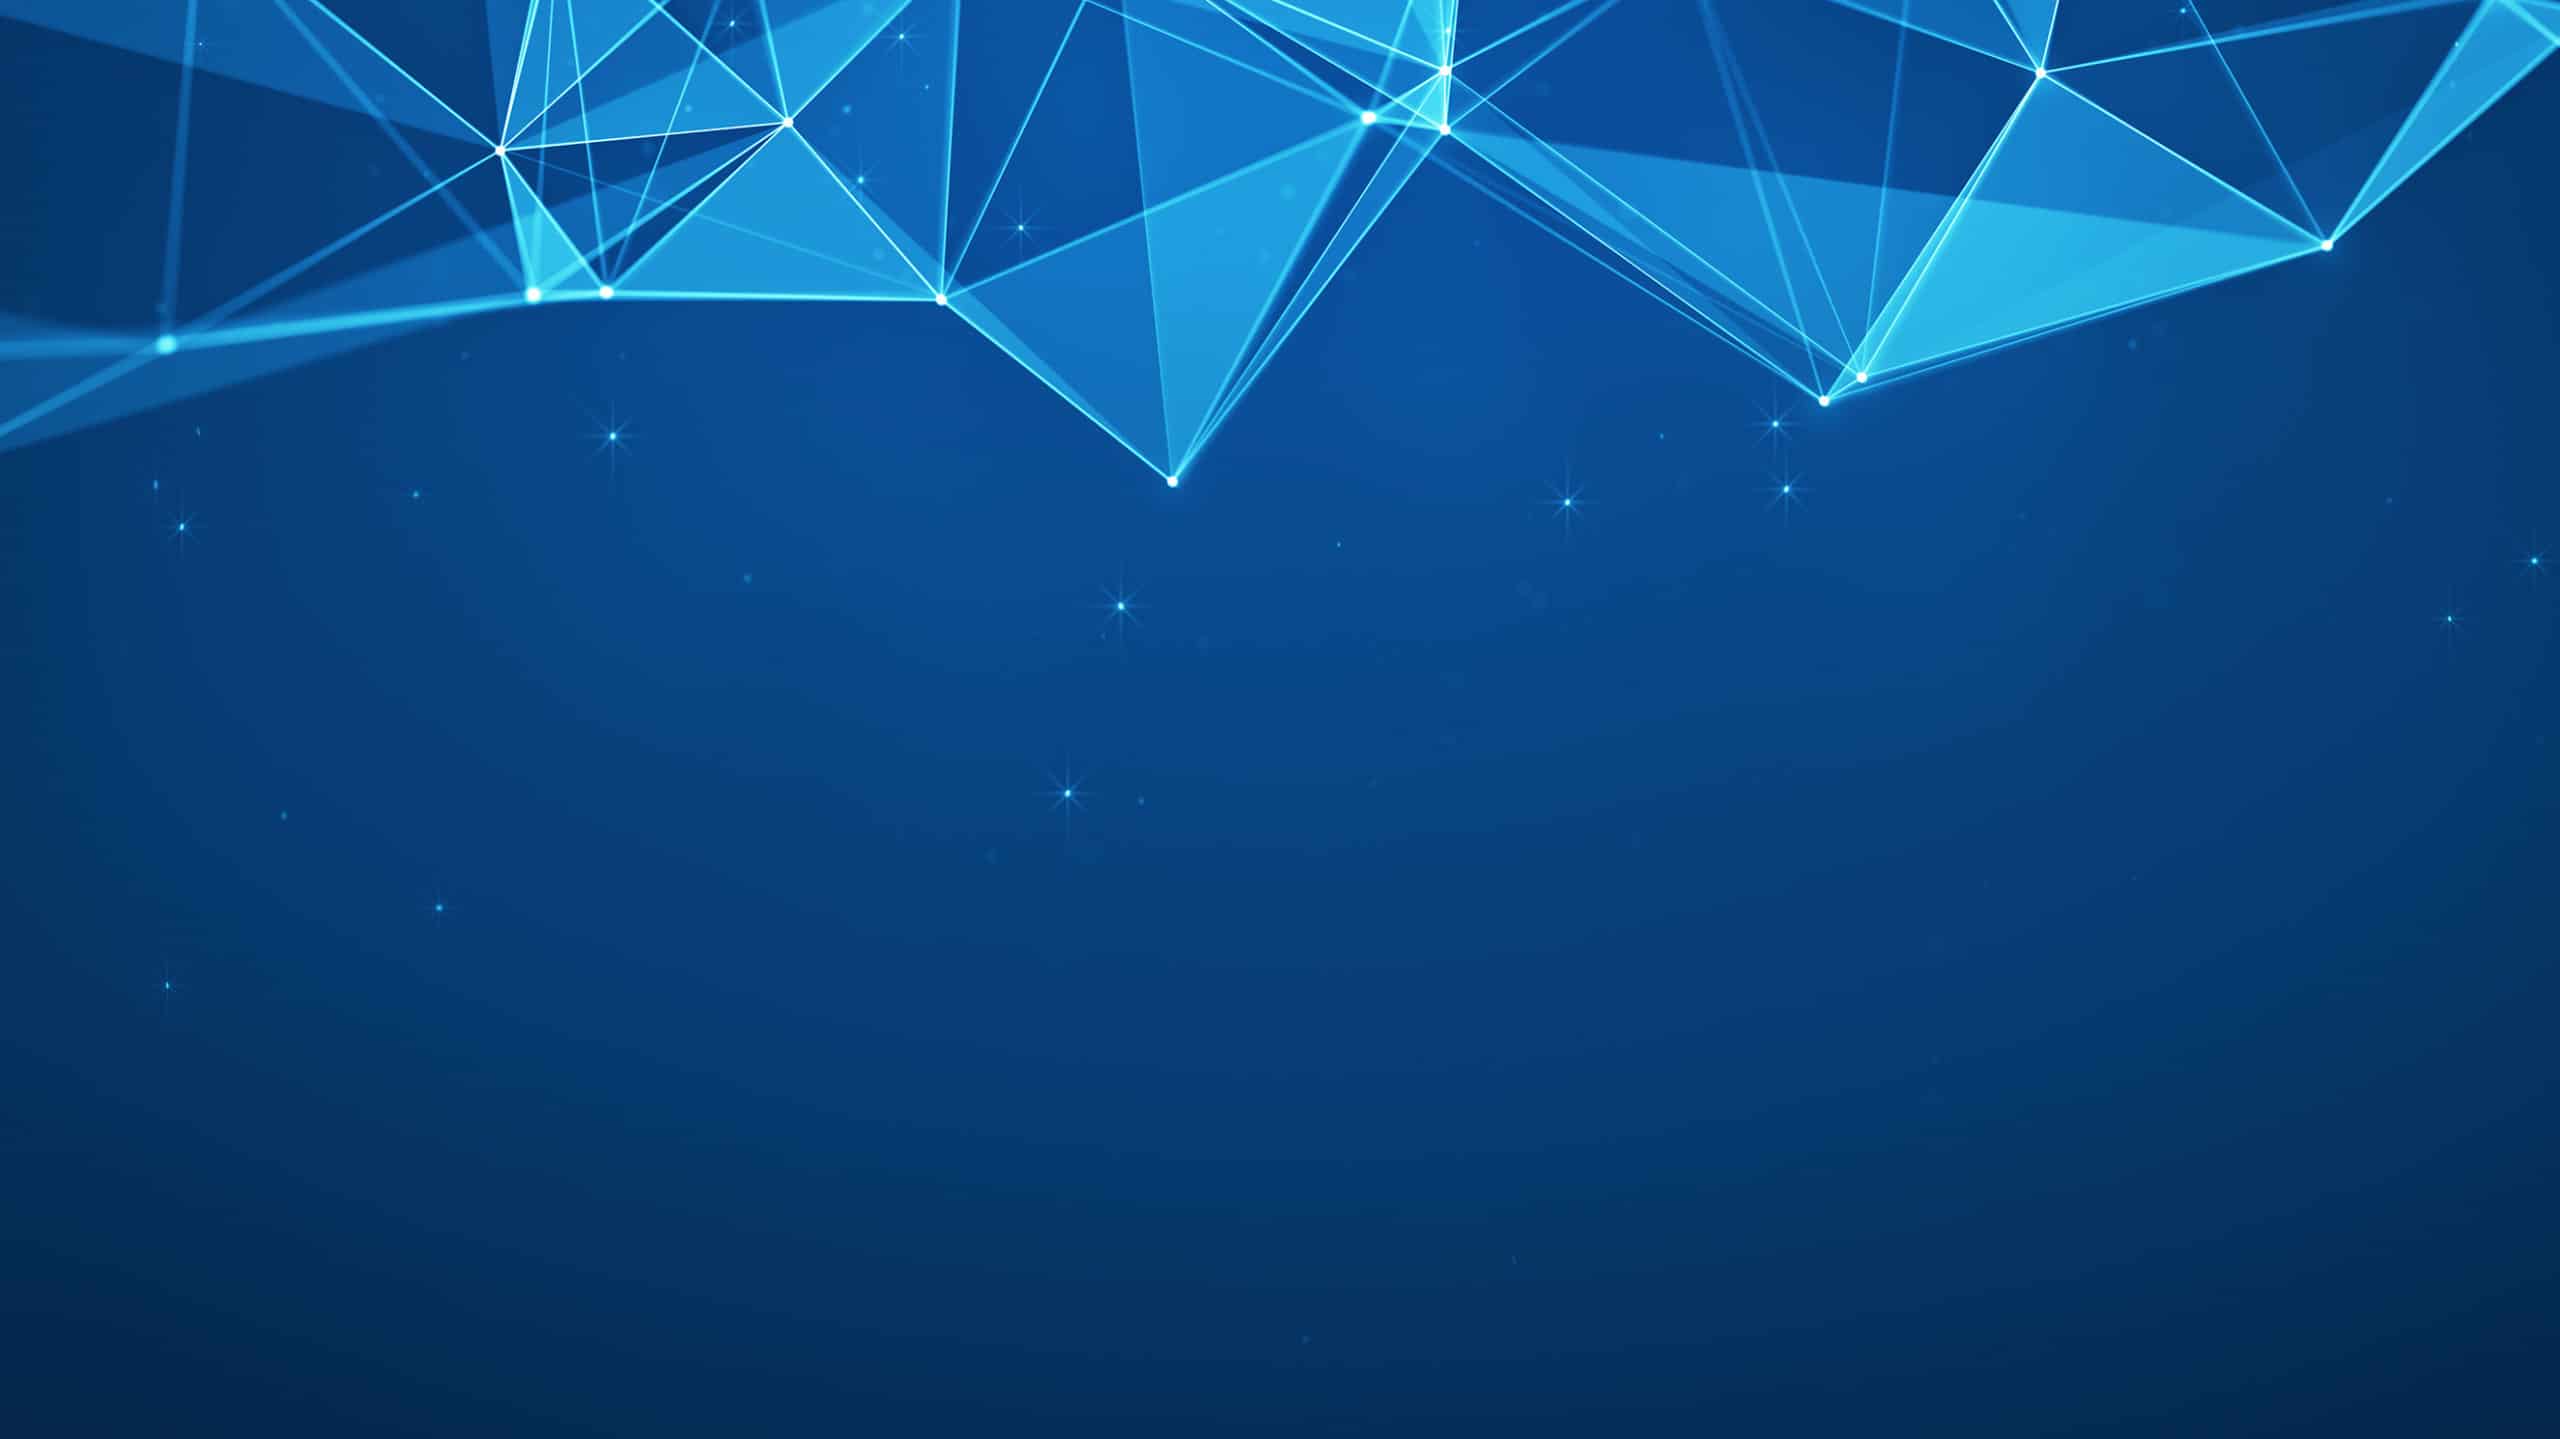 A digital blue background featuring a network of interconnected geometric shapes, creating a mesh of triangles with a slightly glowing effect. Small stars are scattered throughout, enhancing the futuristic feel of what's in a domain name